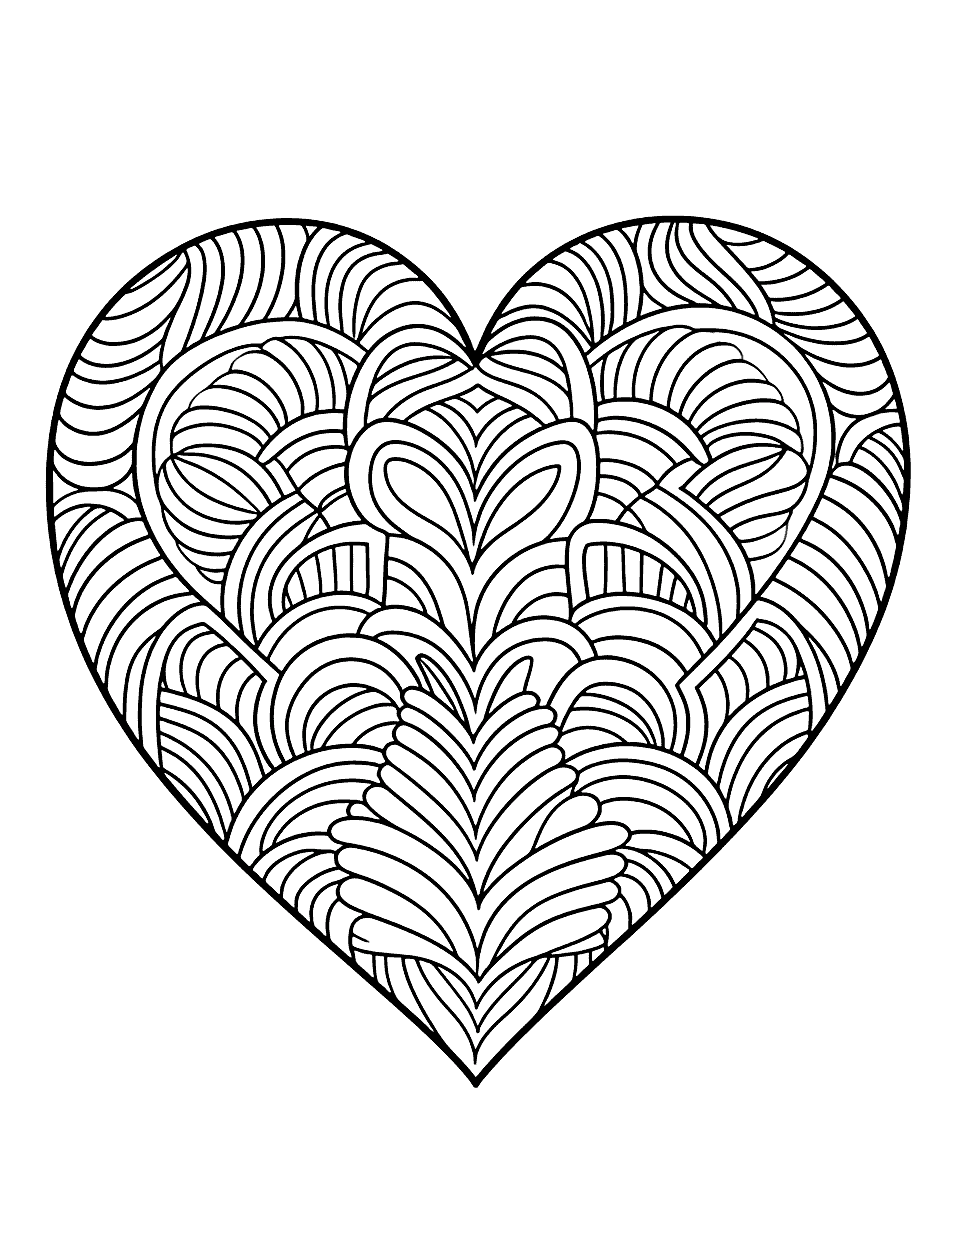 Mandala Inspired Heart Coloring Page - A heart-shaped mandala with intricate patterns for those who enjoy detail-oriented coloring.